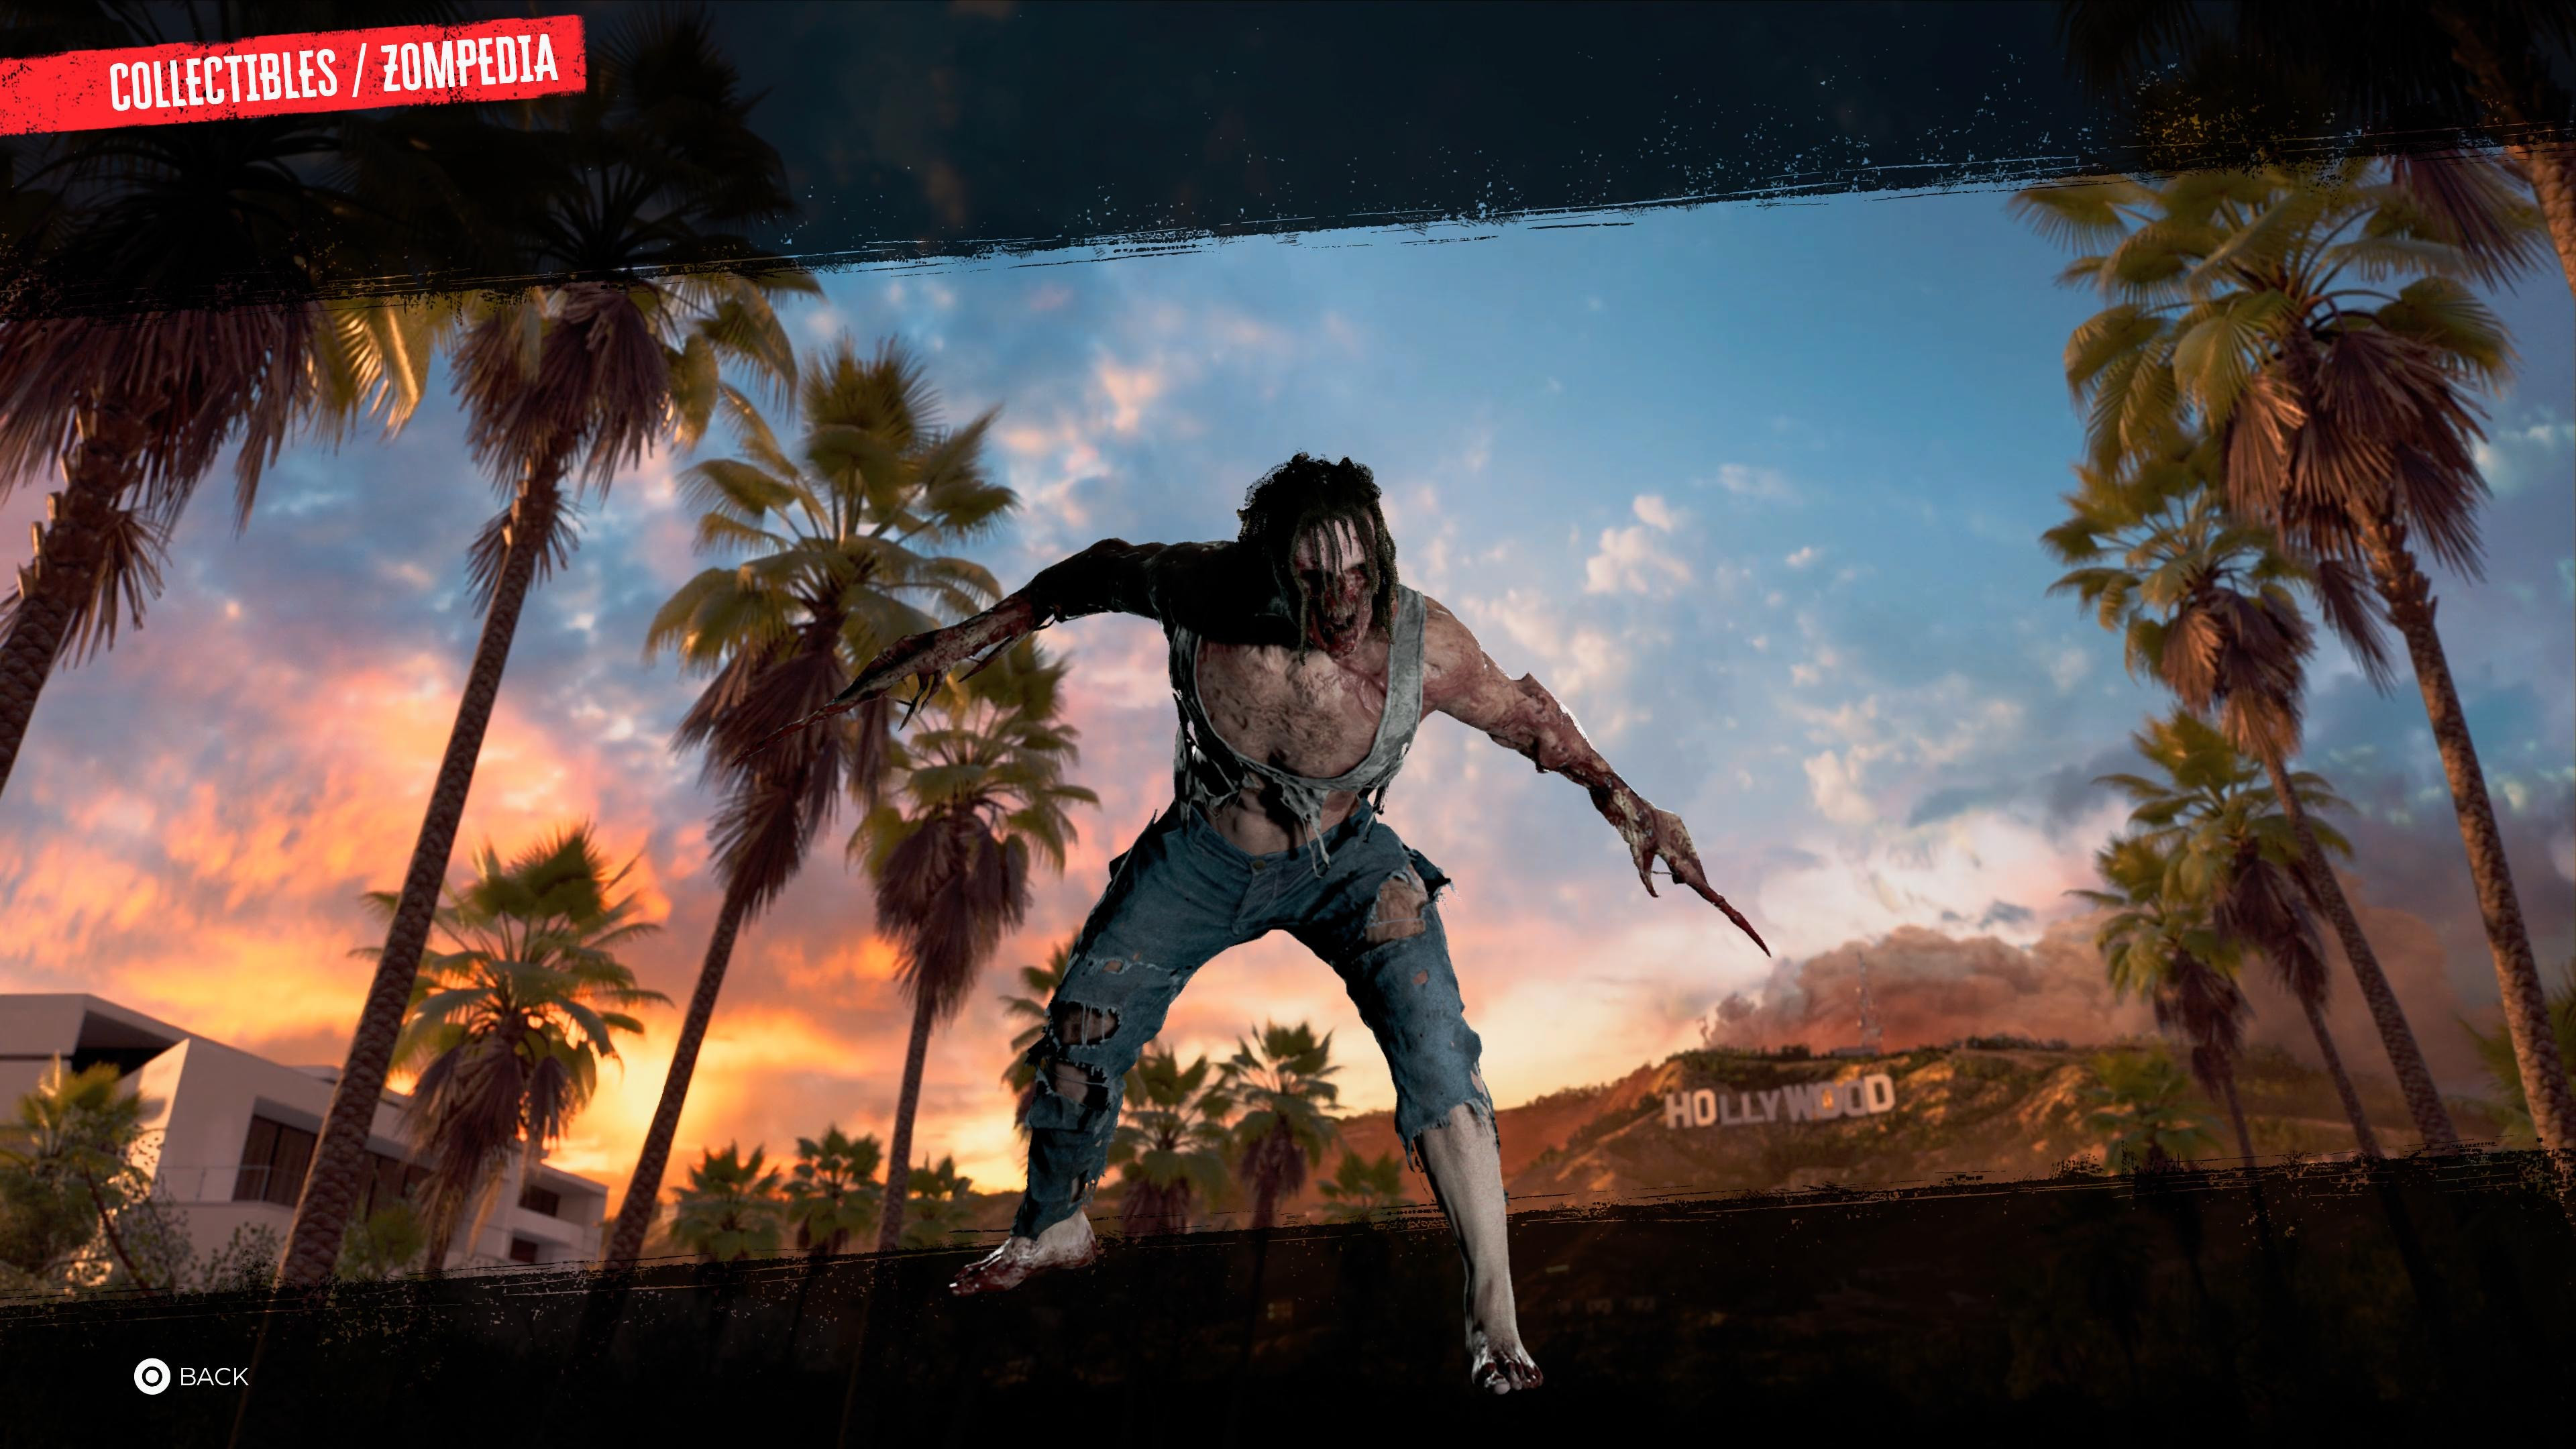 Looks like there's a Dead Island: Definitive Edition